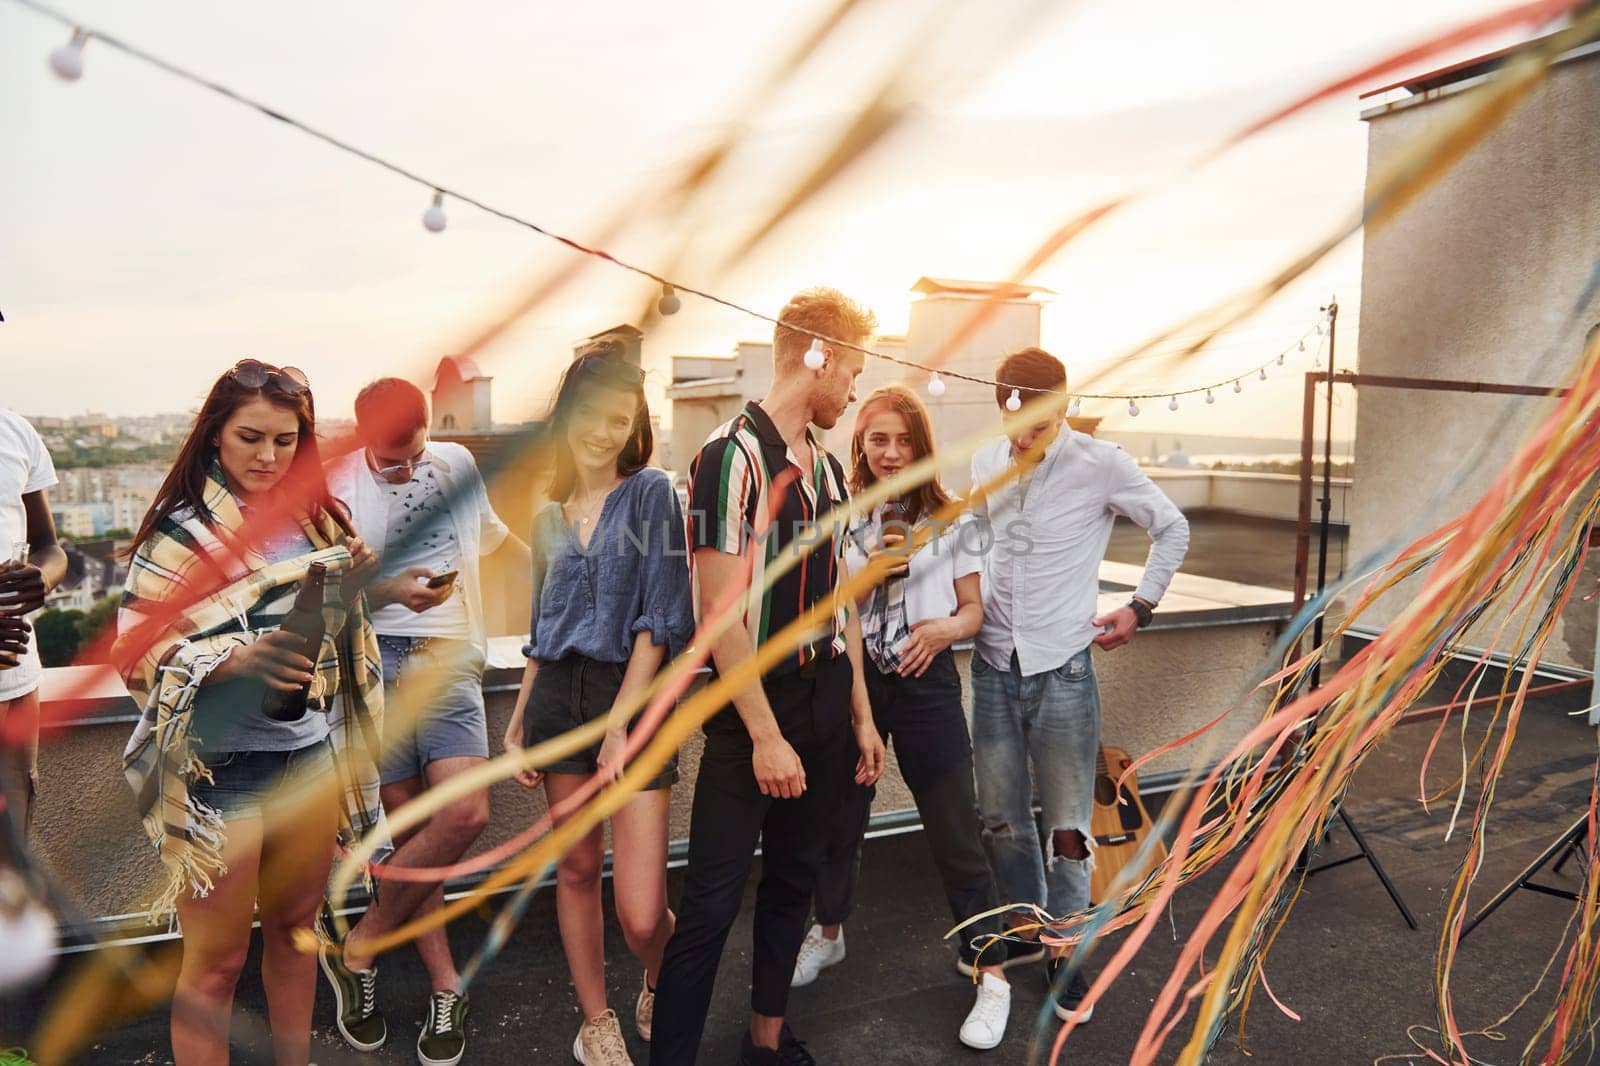 Group of young people in casual clothes have a party at rooftop together at daytime.